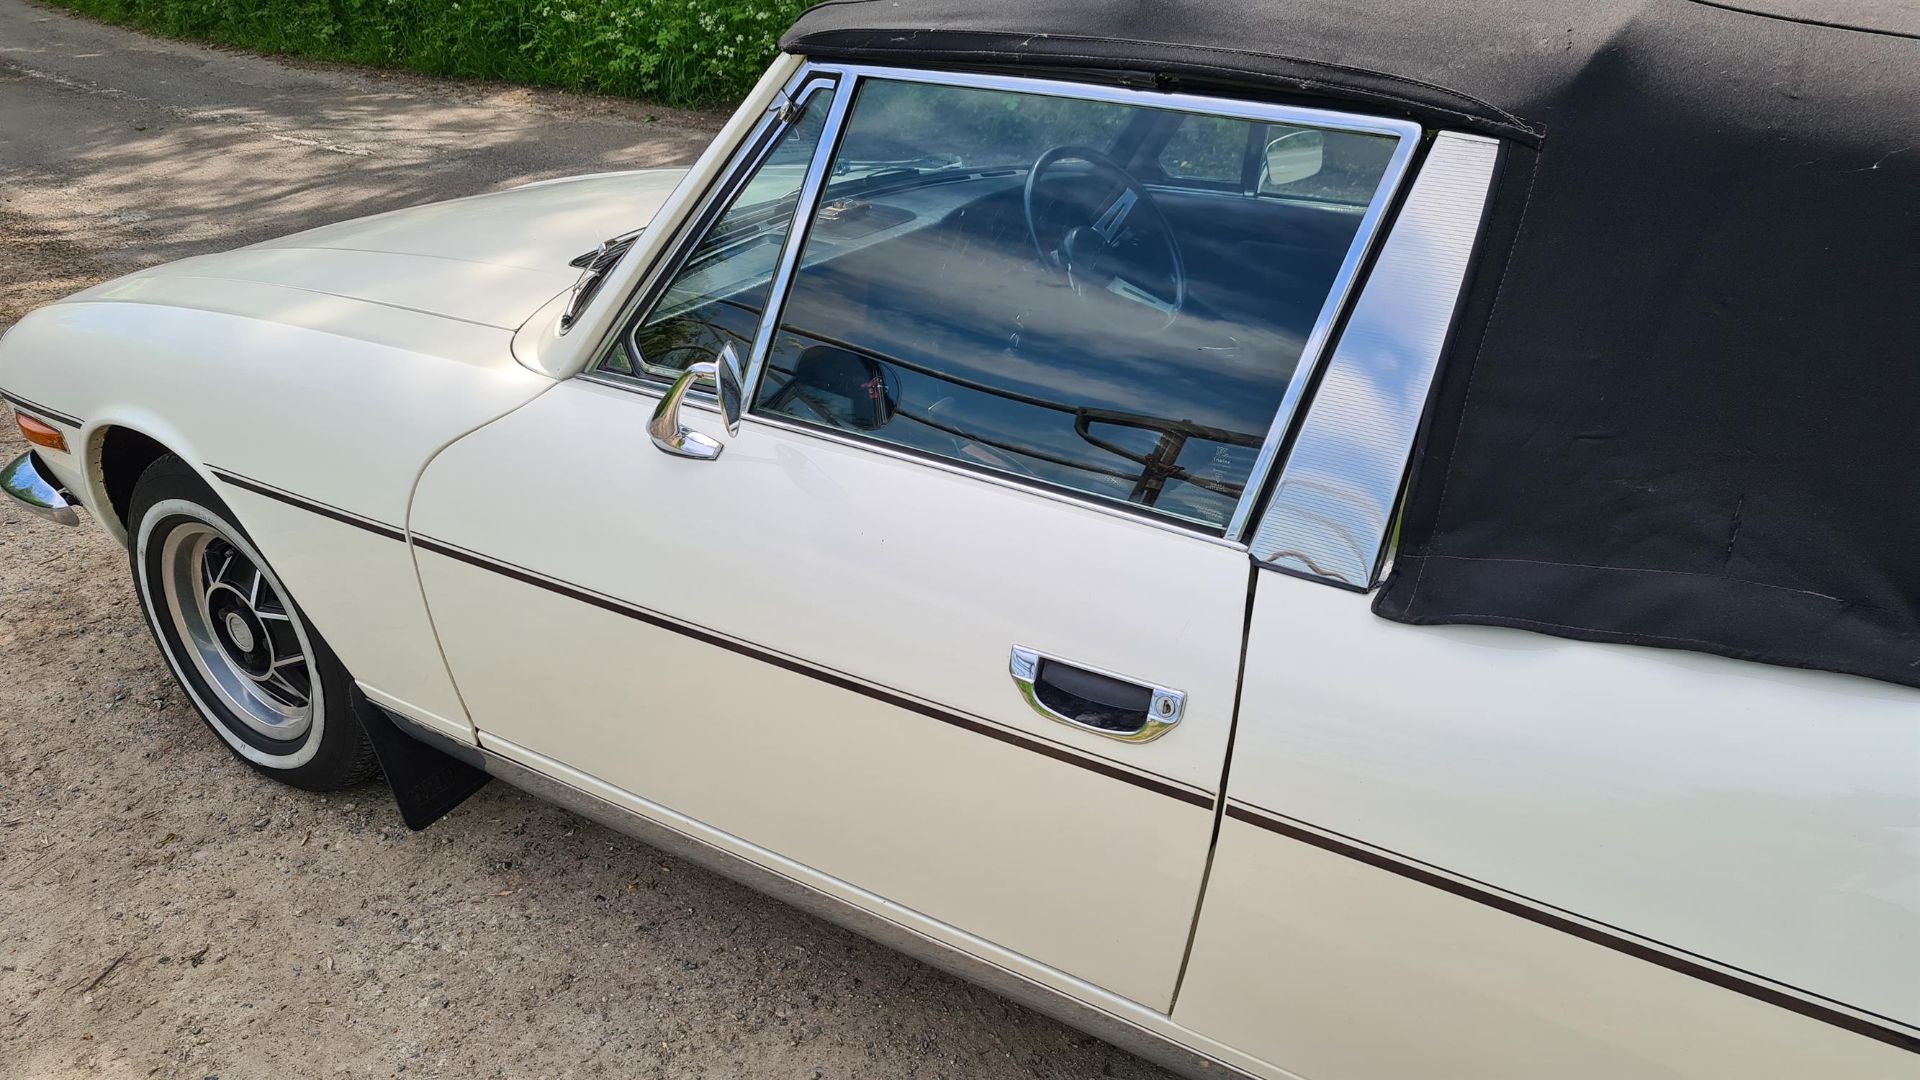 1973 Triumph Stag MkII - Image 3 of 5